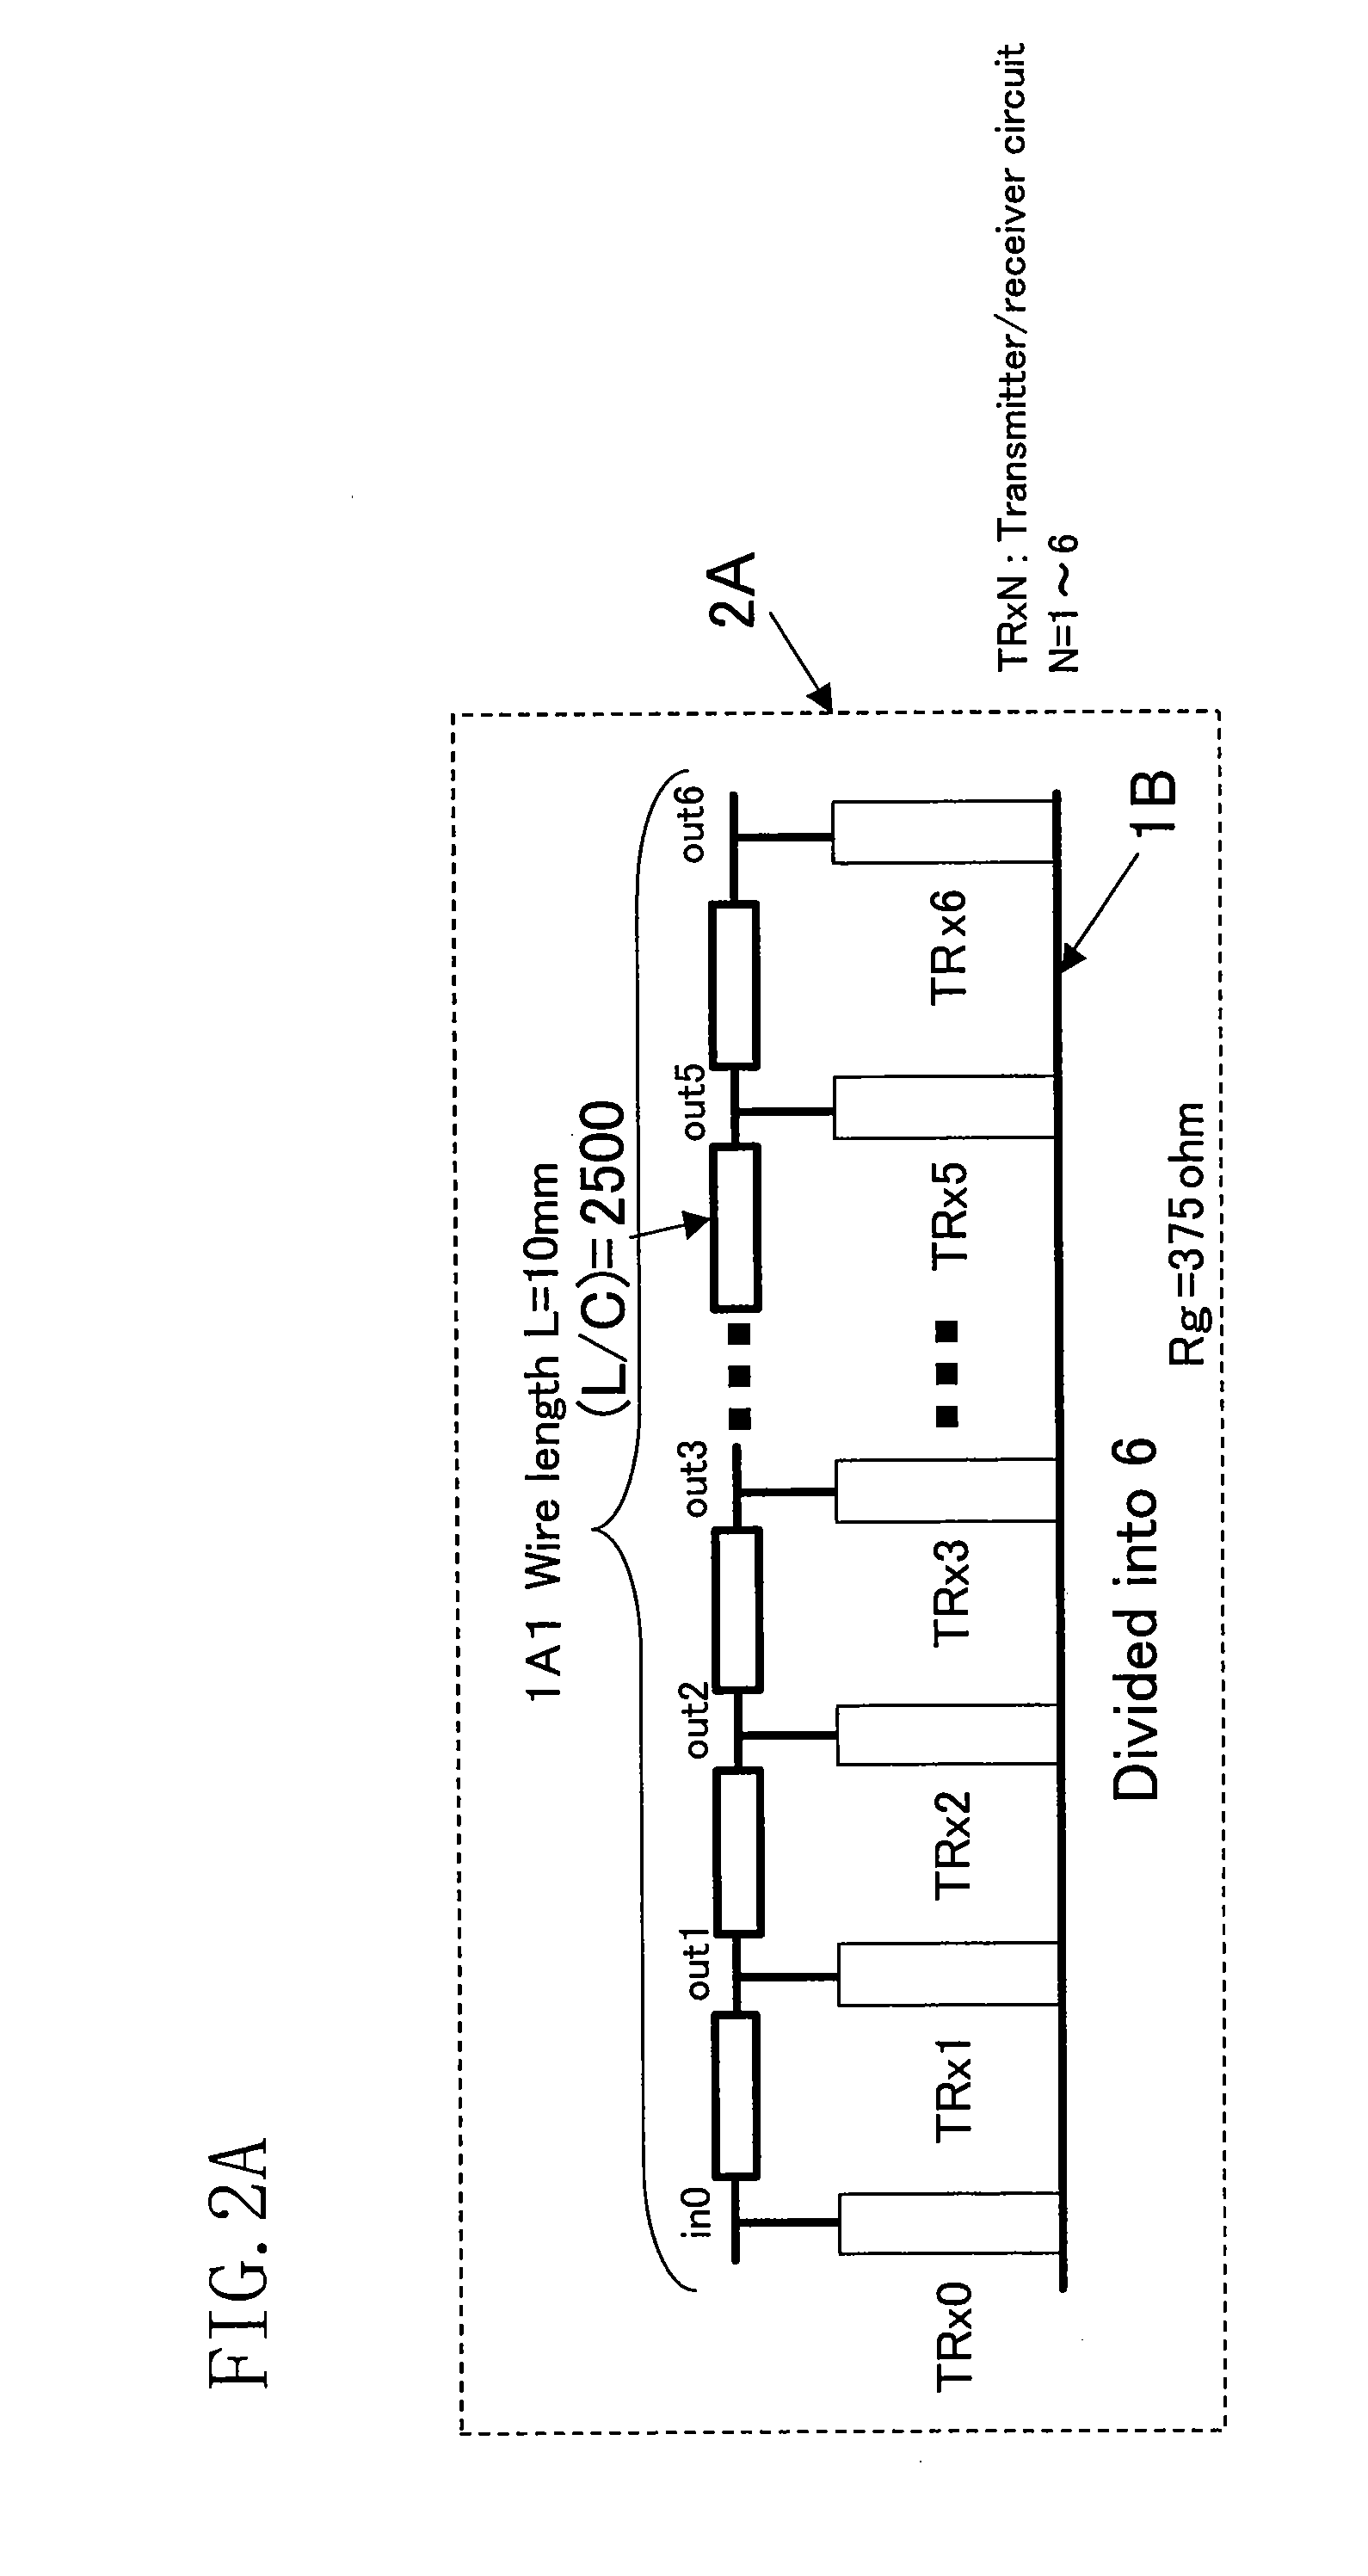 Electronic device, and information apparatus, communications apparatus, av apparatus, and mobile apparatus using the same